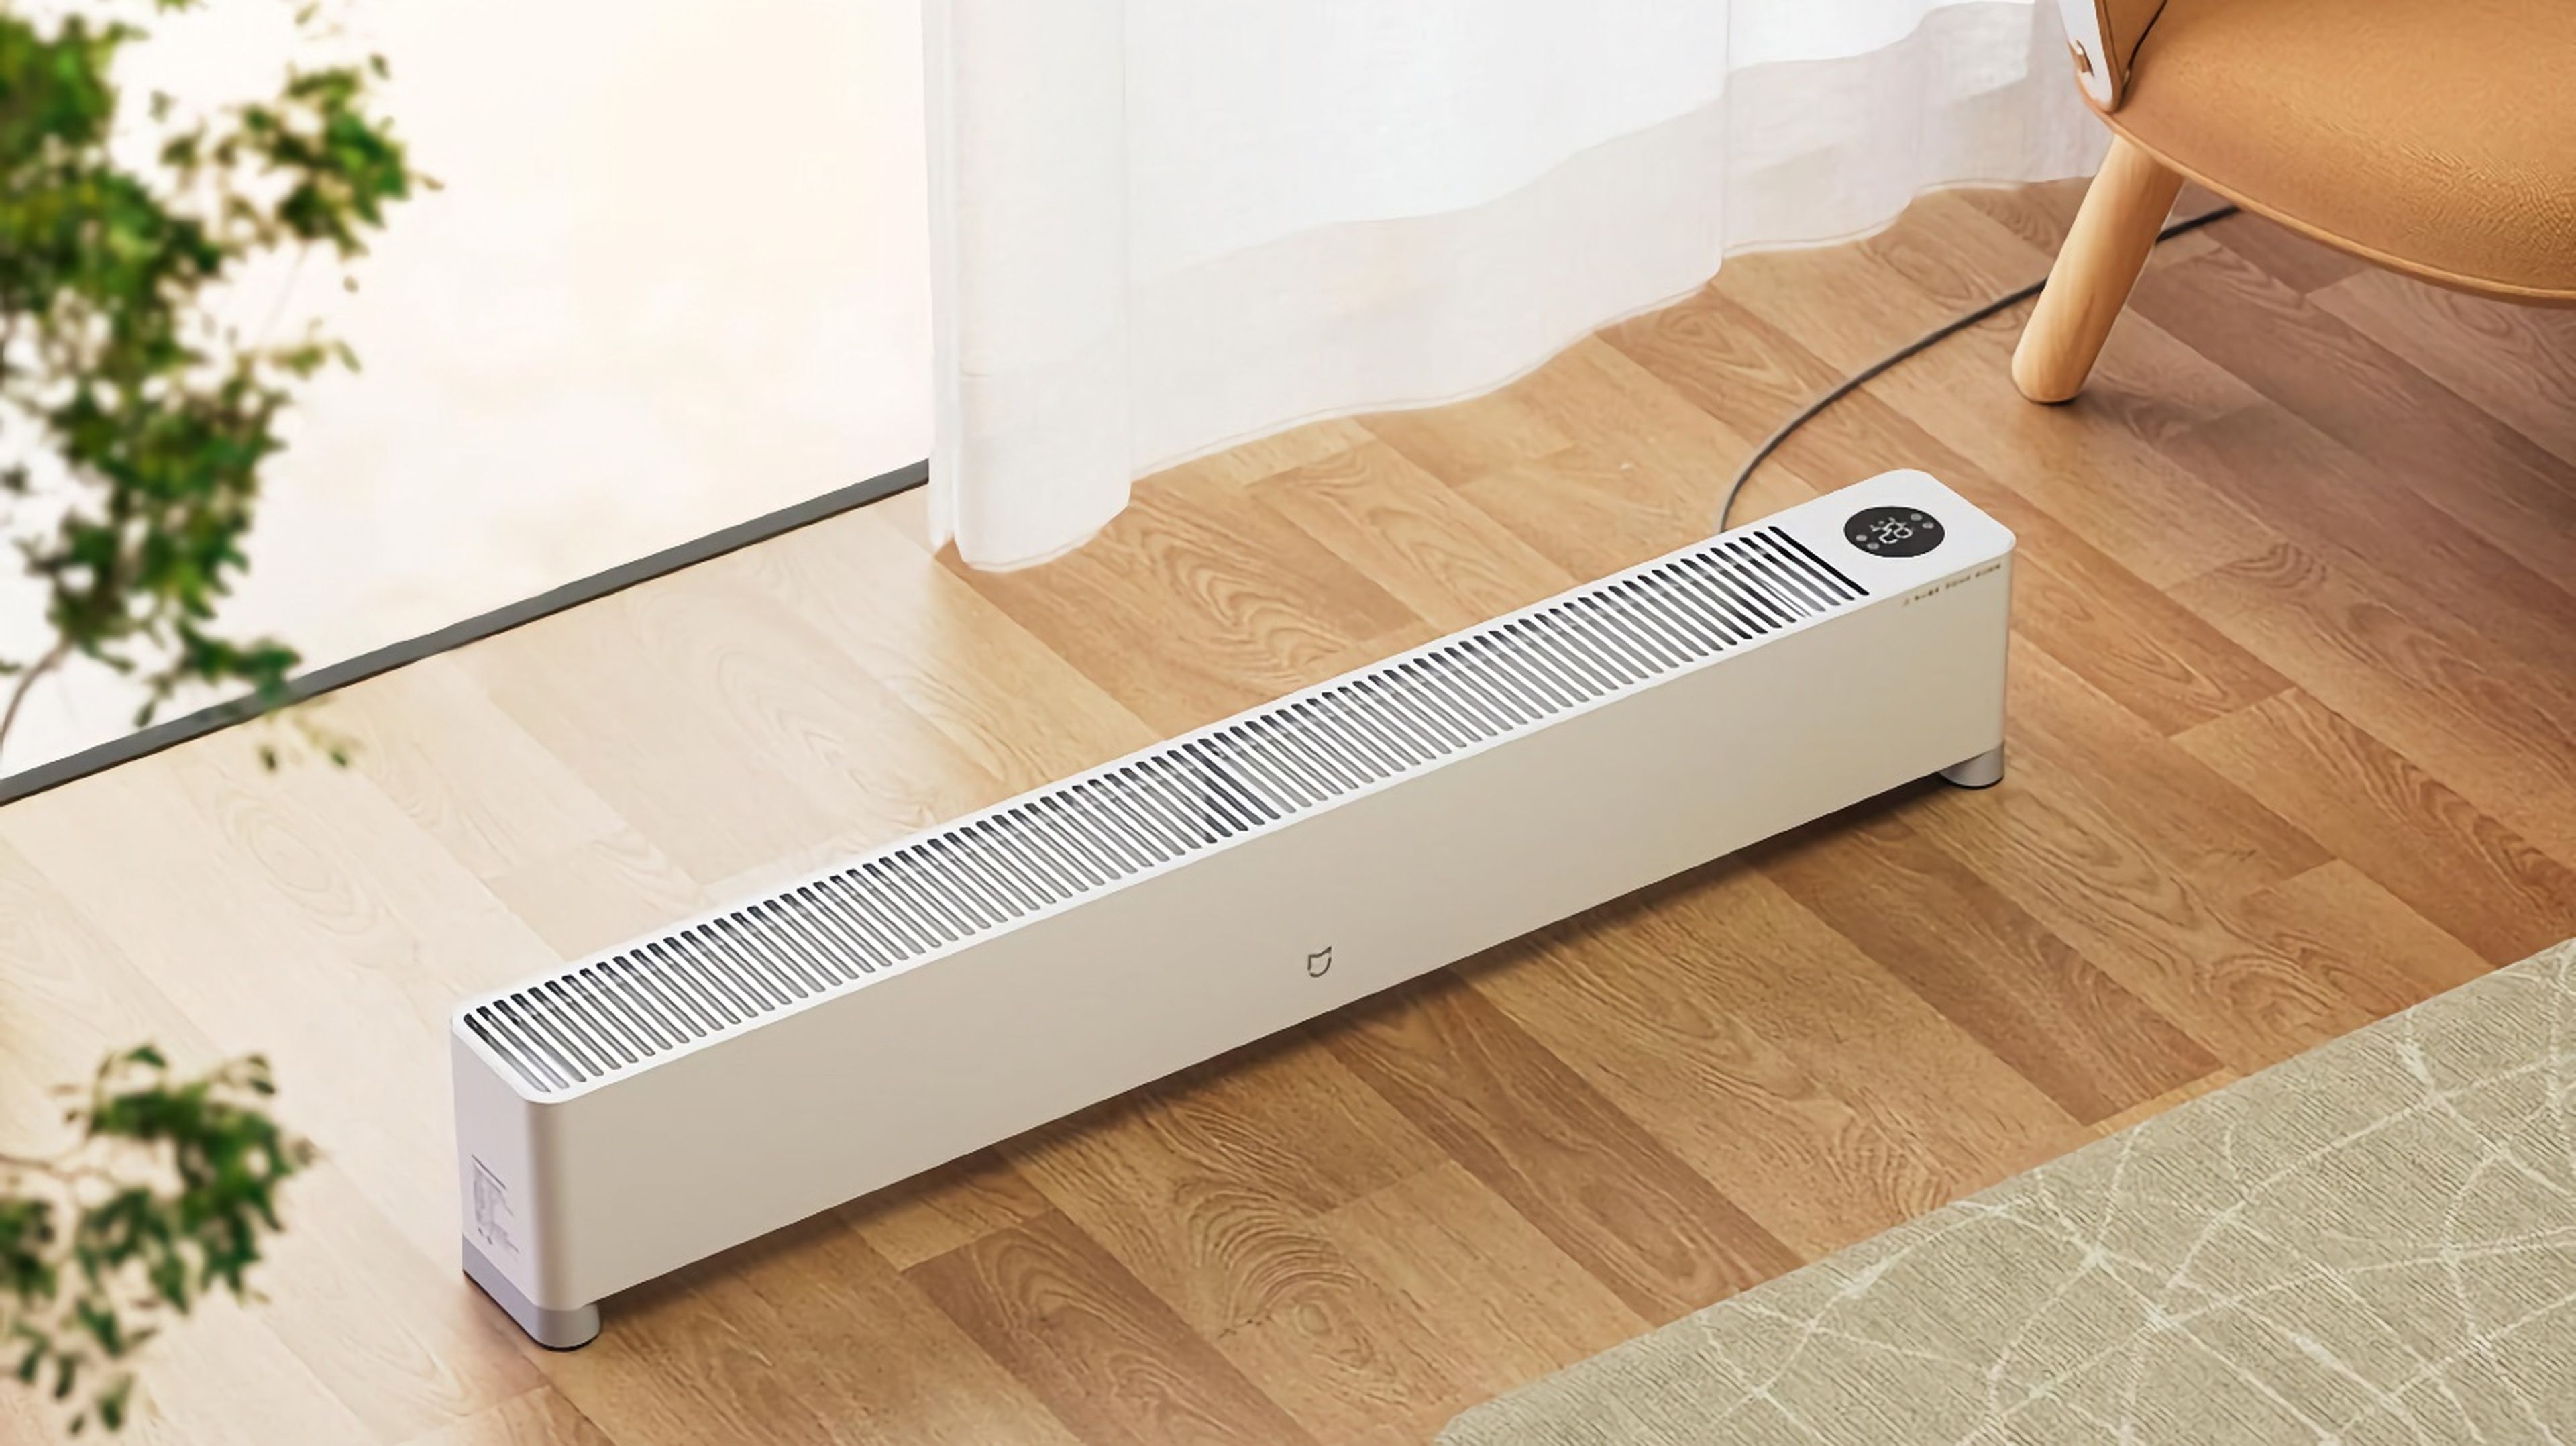 Mijia electric heater and clothes dryer